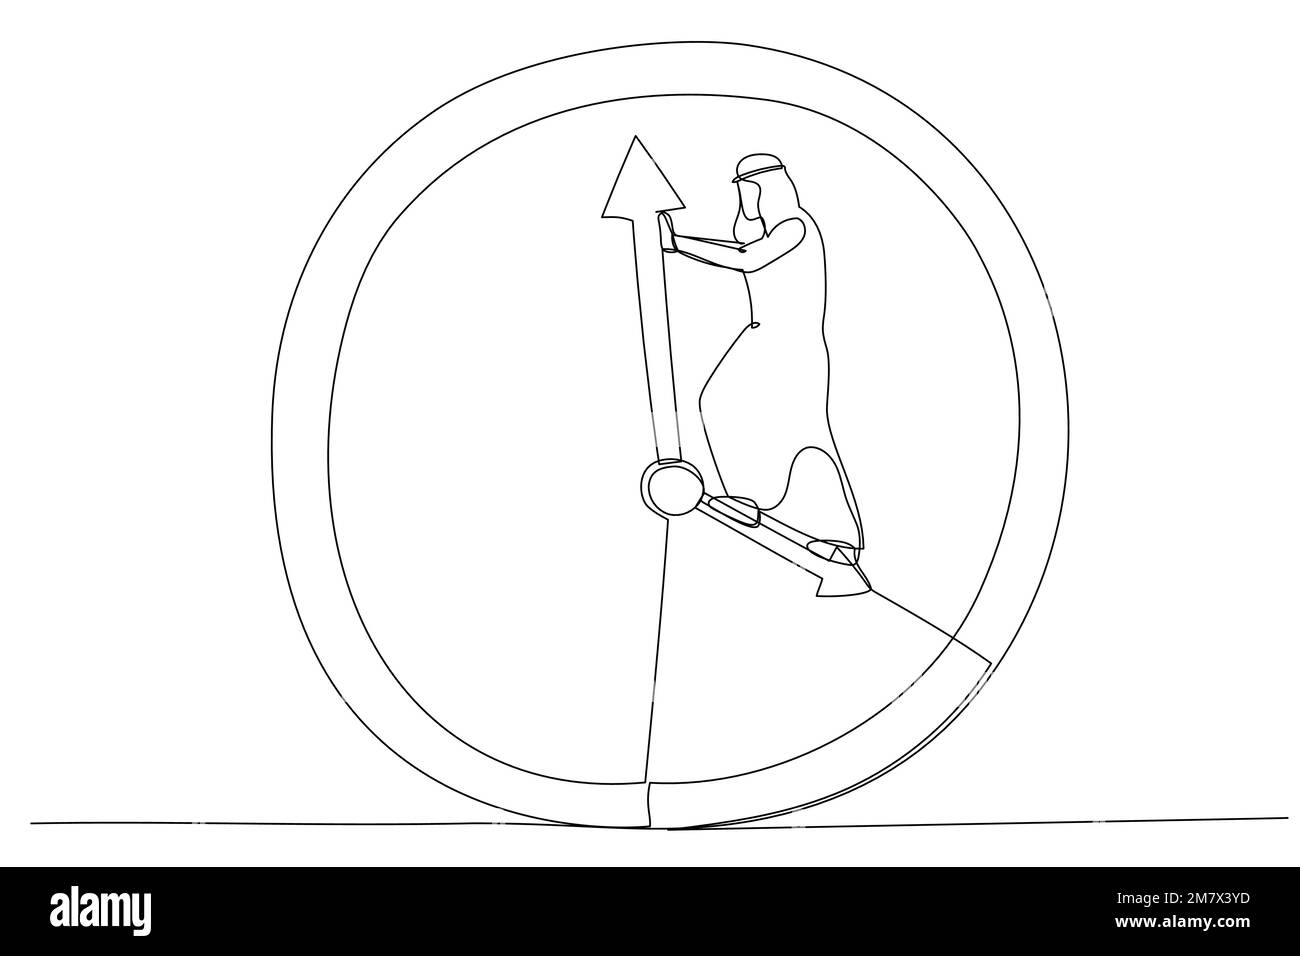 Cartoon of arab businessman standing on clock hour hand manage to push back minute. Turn back time metaphor. Single continuous line art style Stock Vector